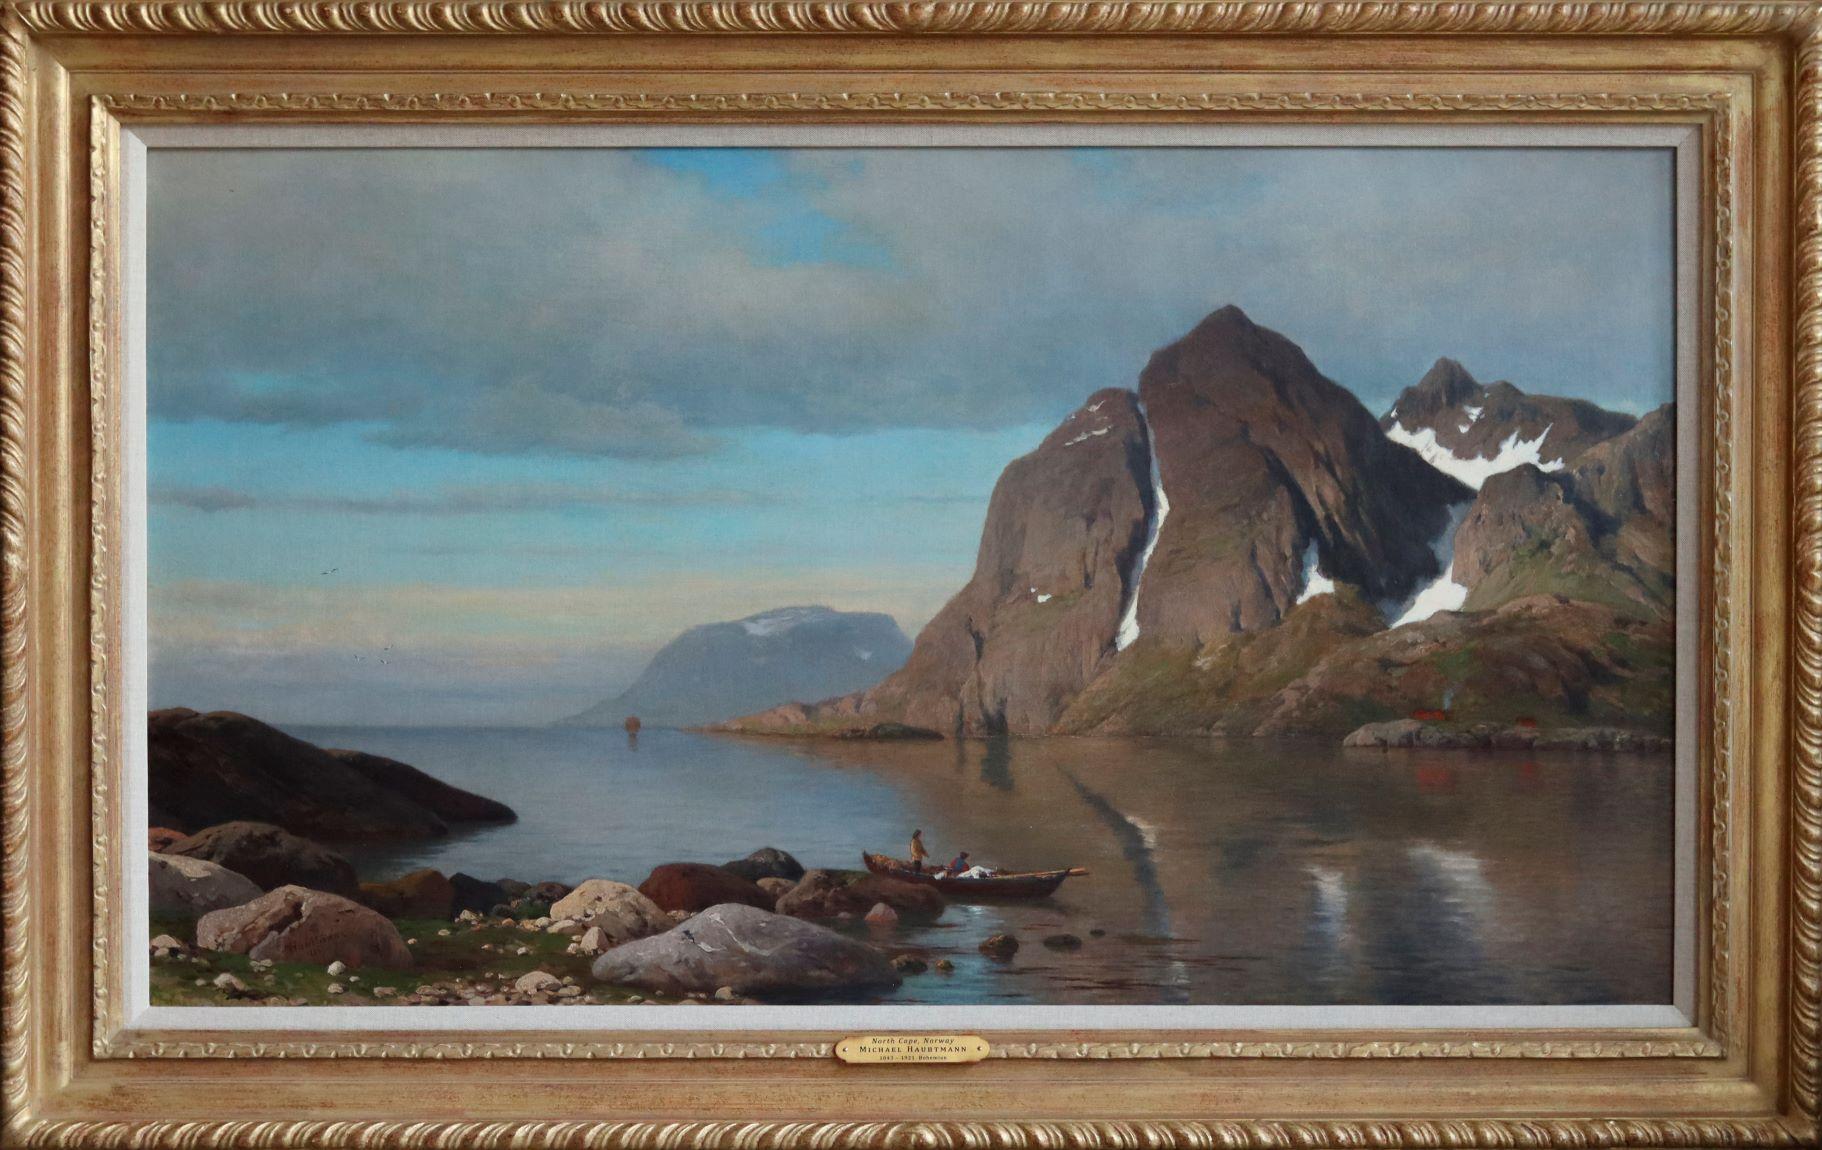 North Cape, Norway                                                               - Painting by Michael Haubtmann